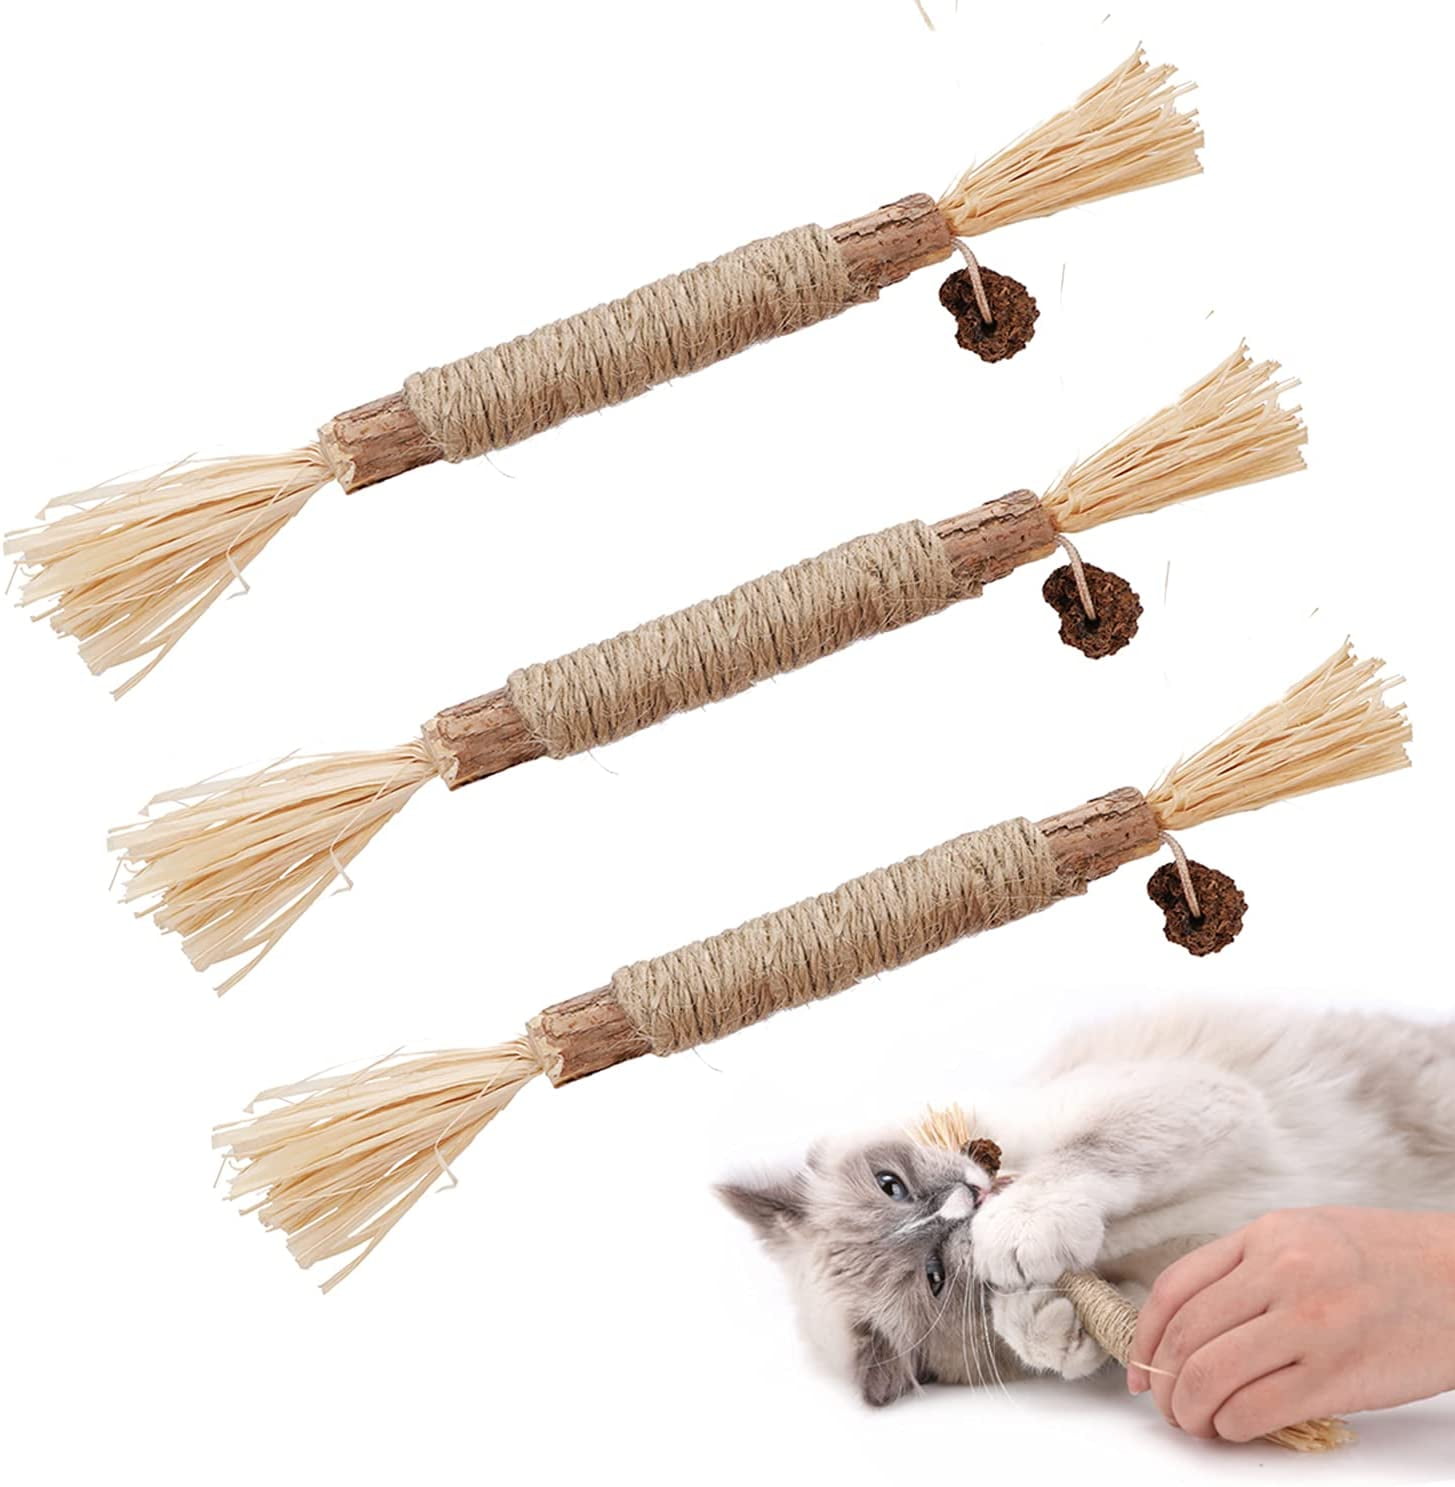 3 Pacs Cat Toys Silvervine Sticks for Indoor Cats Dental Care Cat Treat Pet Toys Calm Cat Anxiety and Stress Natural Catnip Cat Chew Toys for Kittens Teeth Cleaning 